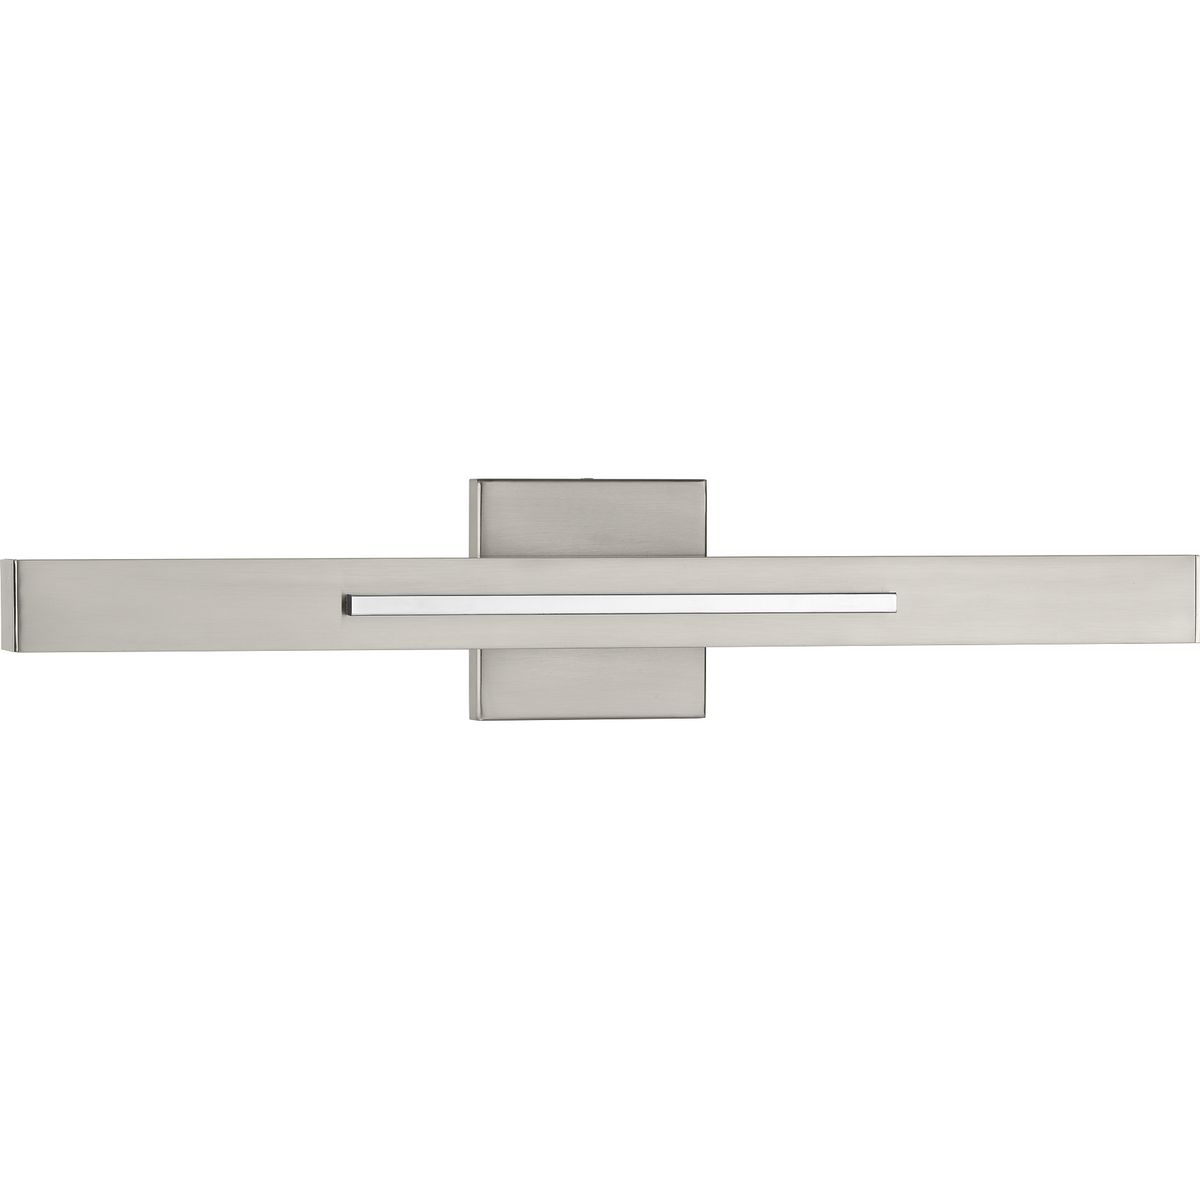 P710052-009-30 2-30W LED WALL SCONCE